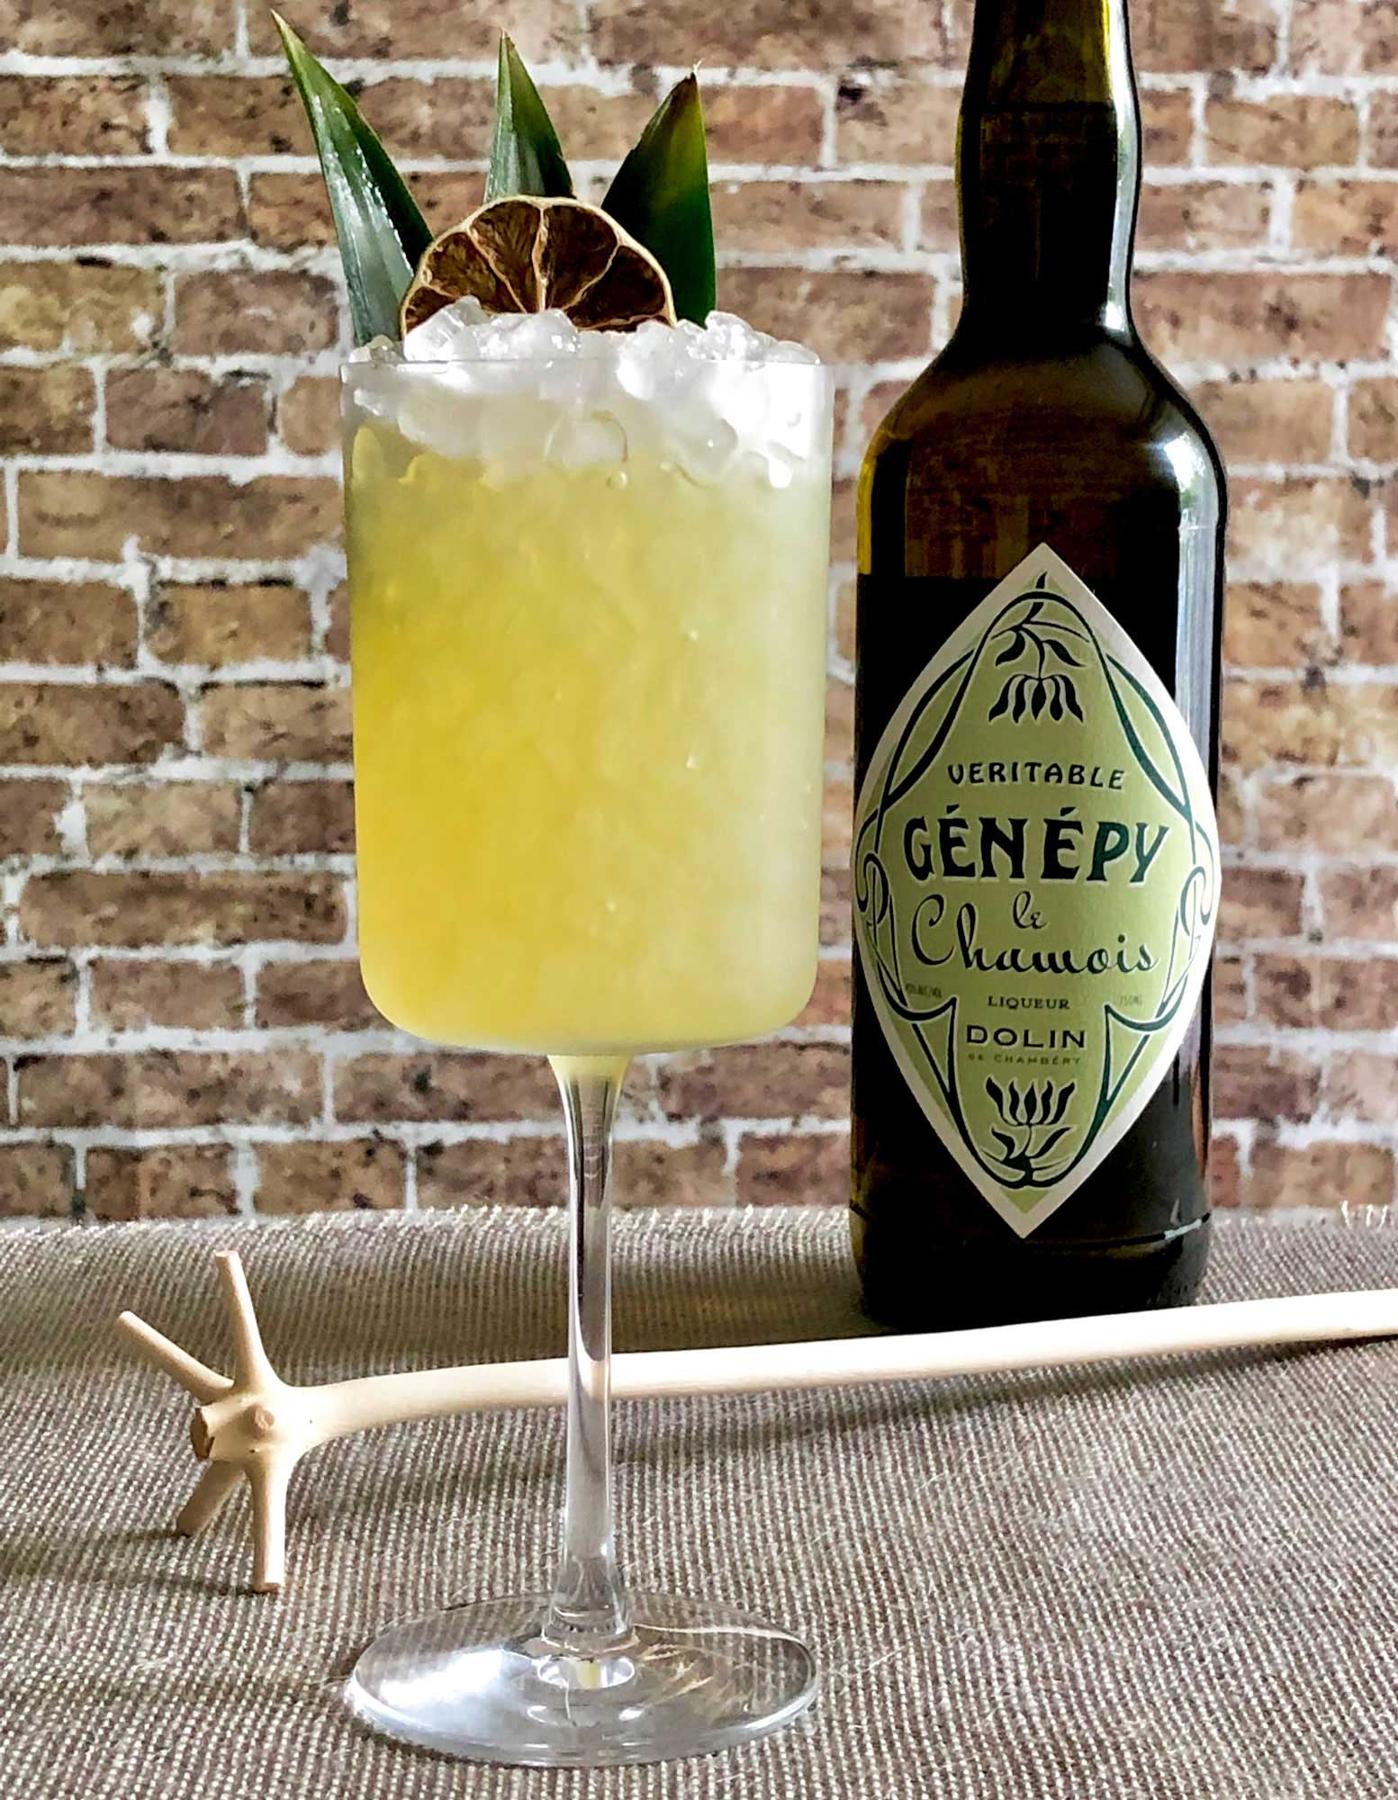 An example of the Génépy Swizzle, the mixed drink (drink), by Based on the Chartreuse Swizzle by Marcovaldo Dionysos, San Francisco, California, featuring Dolin Génépy le Chamois Liqueur, pineapple juice, John D. Taylor’s Velvet Falernum, lime juice, and pineapple leaf; photo by Lee Edwards